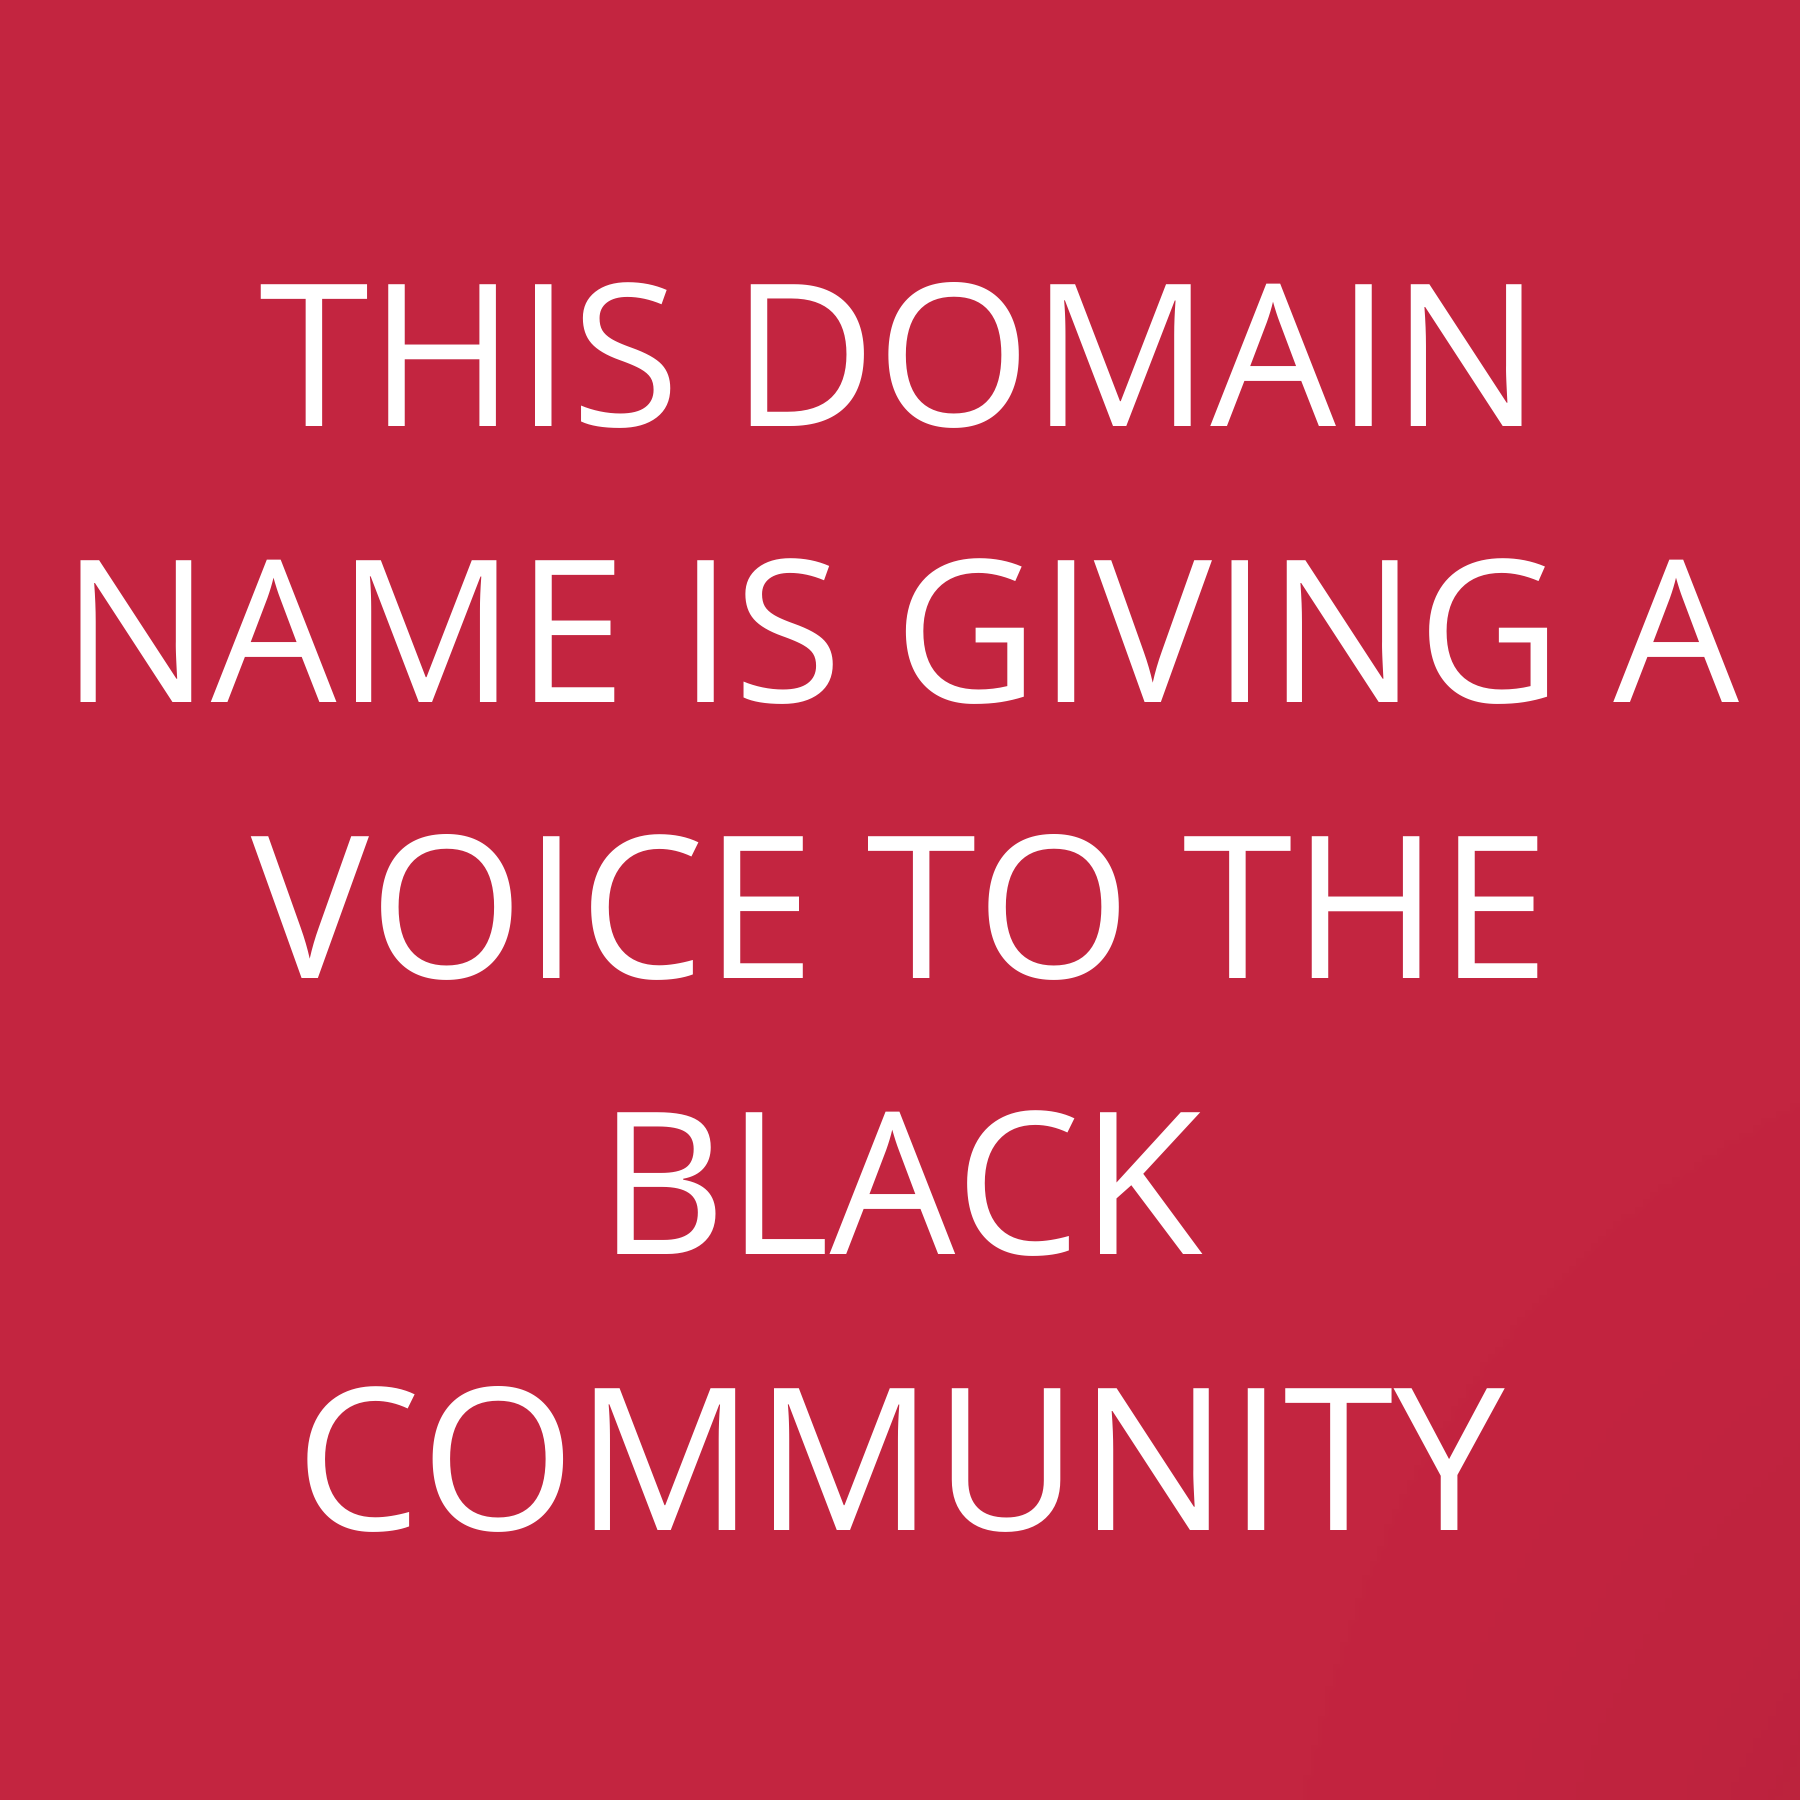 This domain name is giving a voice to the Black Community